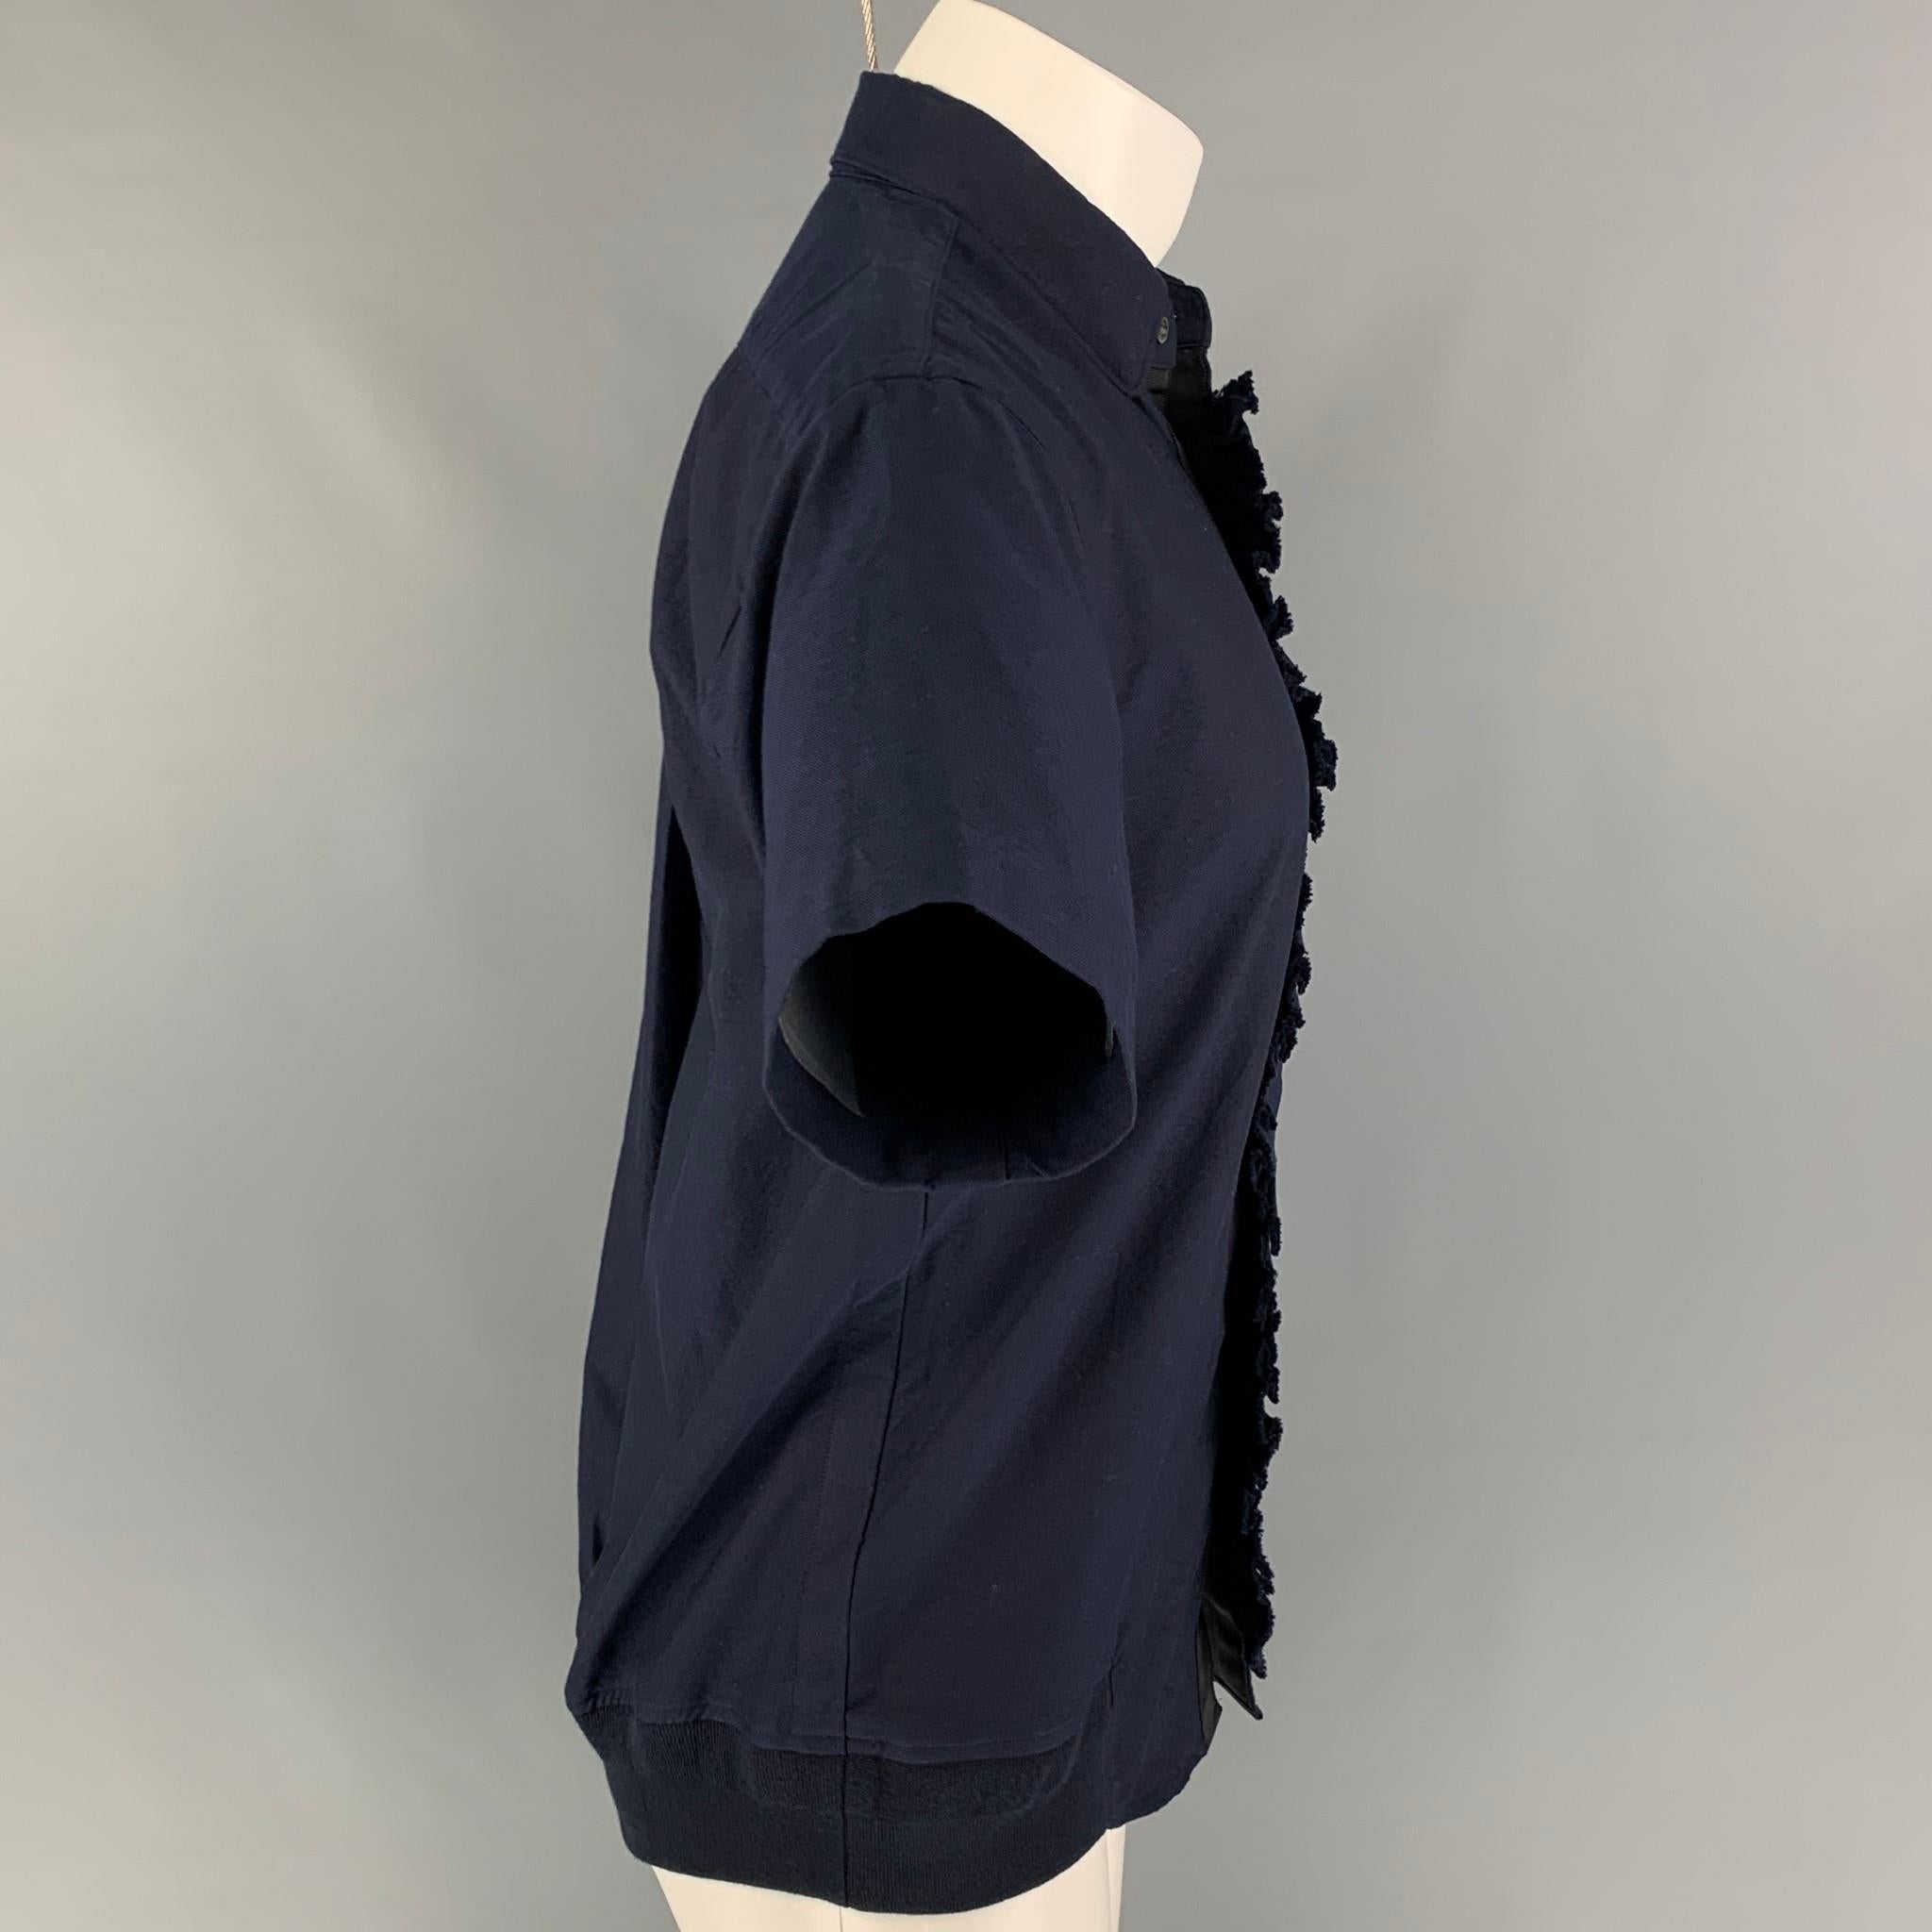 SACAI short sleeve shirt comes in a navy cotton featuring a ruffled trim, elastic hem, patch pocket, spread collar, and a button up closure. 

Very Good Pre-Owned Condition.
Marked: 1

Measurements:

Shoulder: 17 in.
Chest: 38 in.
Sleeve: 9